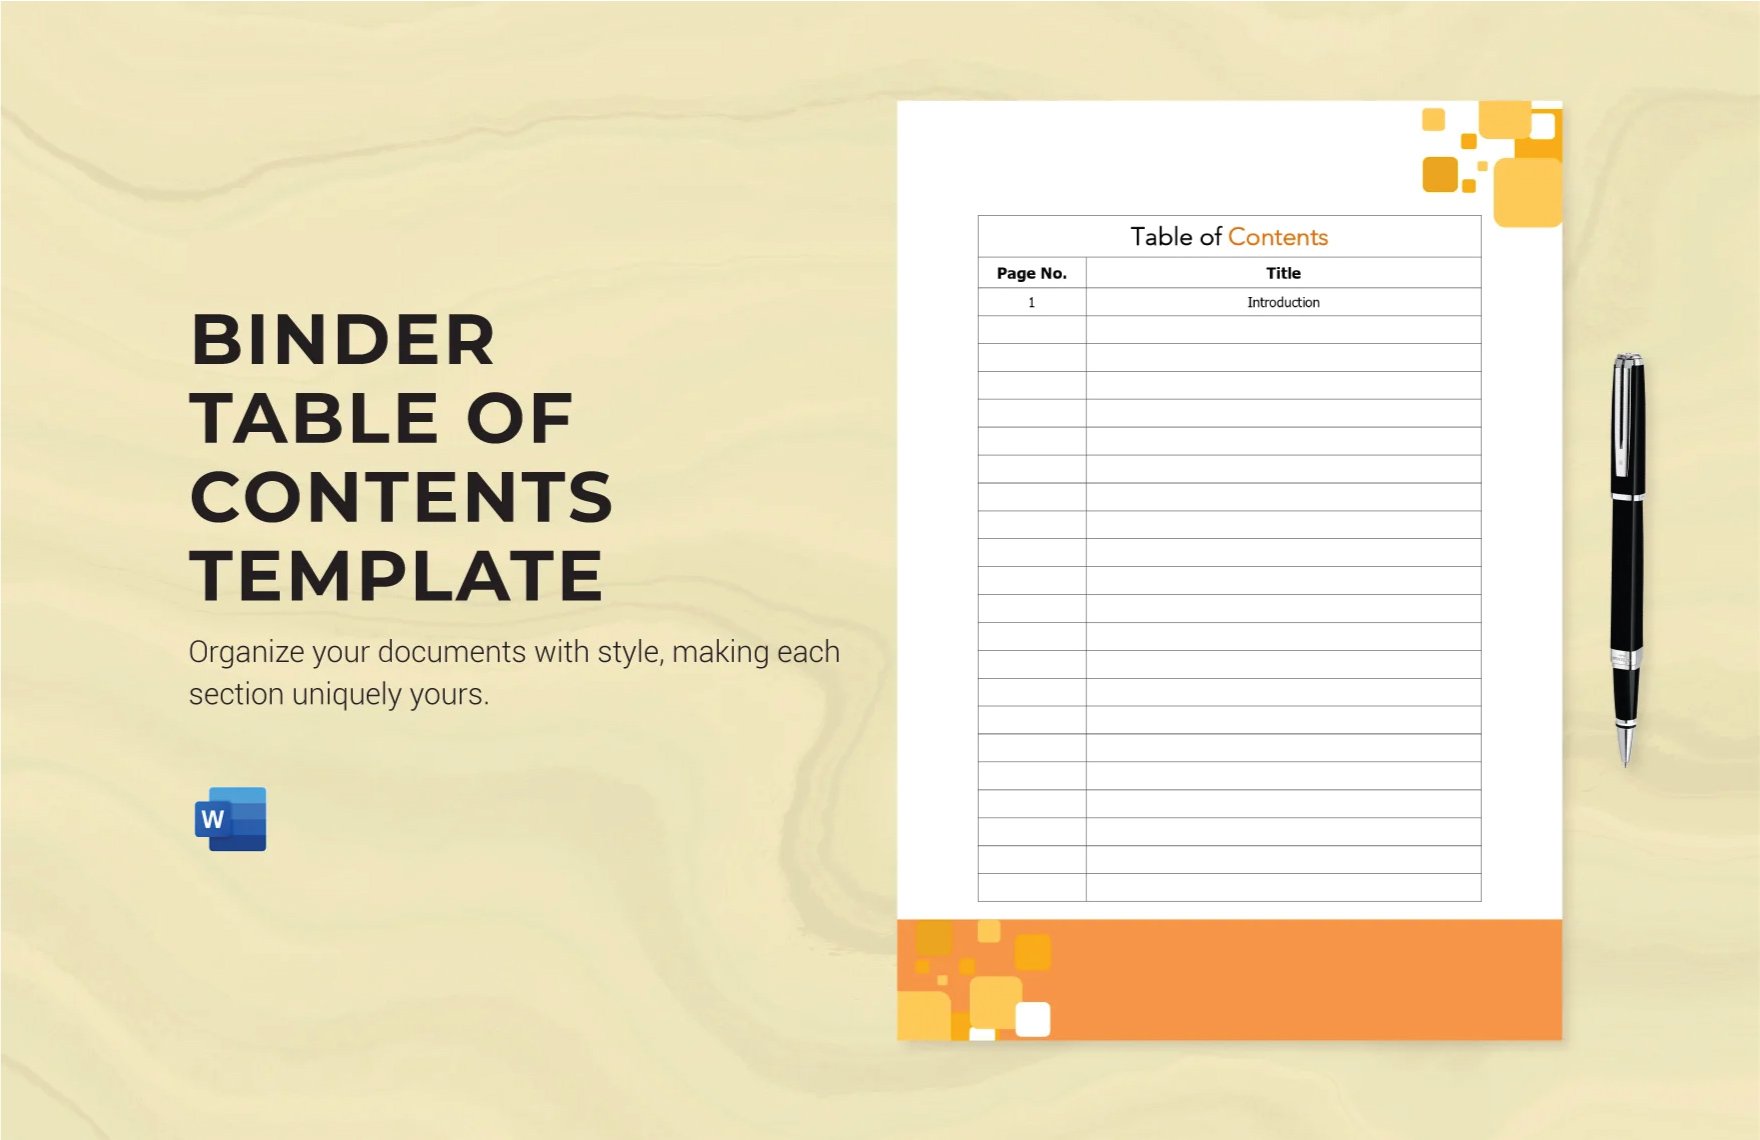 Binder Table of Contents Template